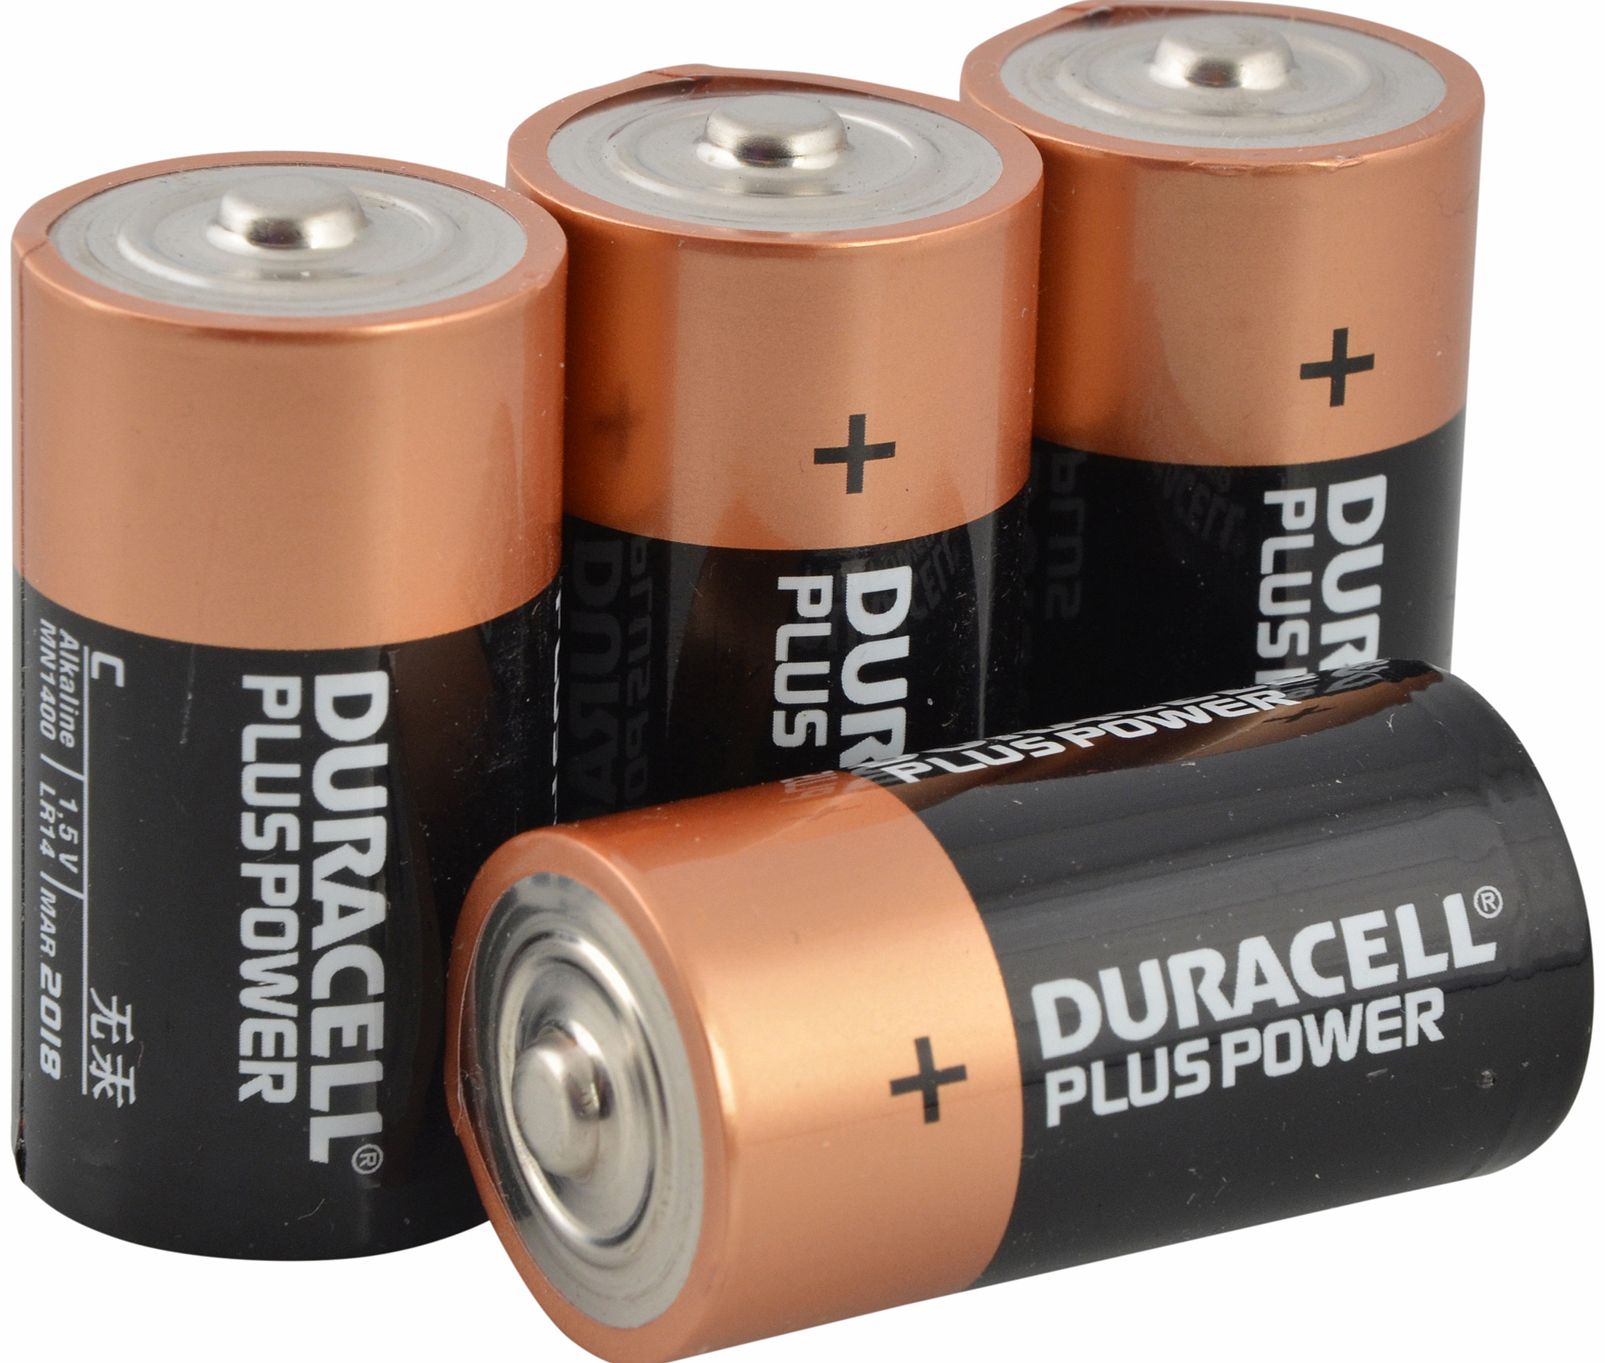 Duracell Plus Power C Cell Batteries Pack of 4